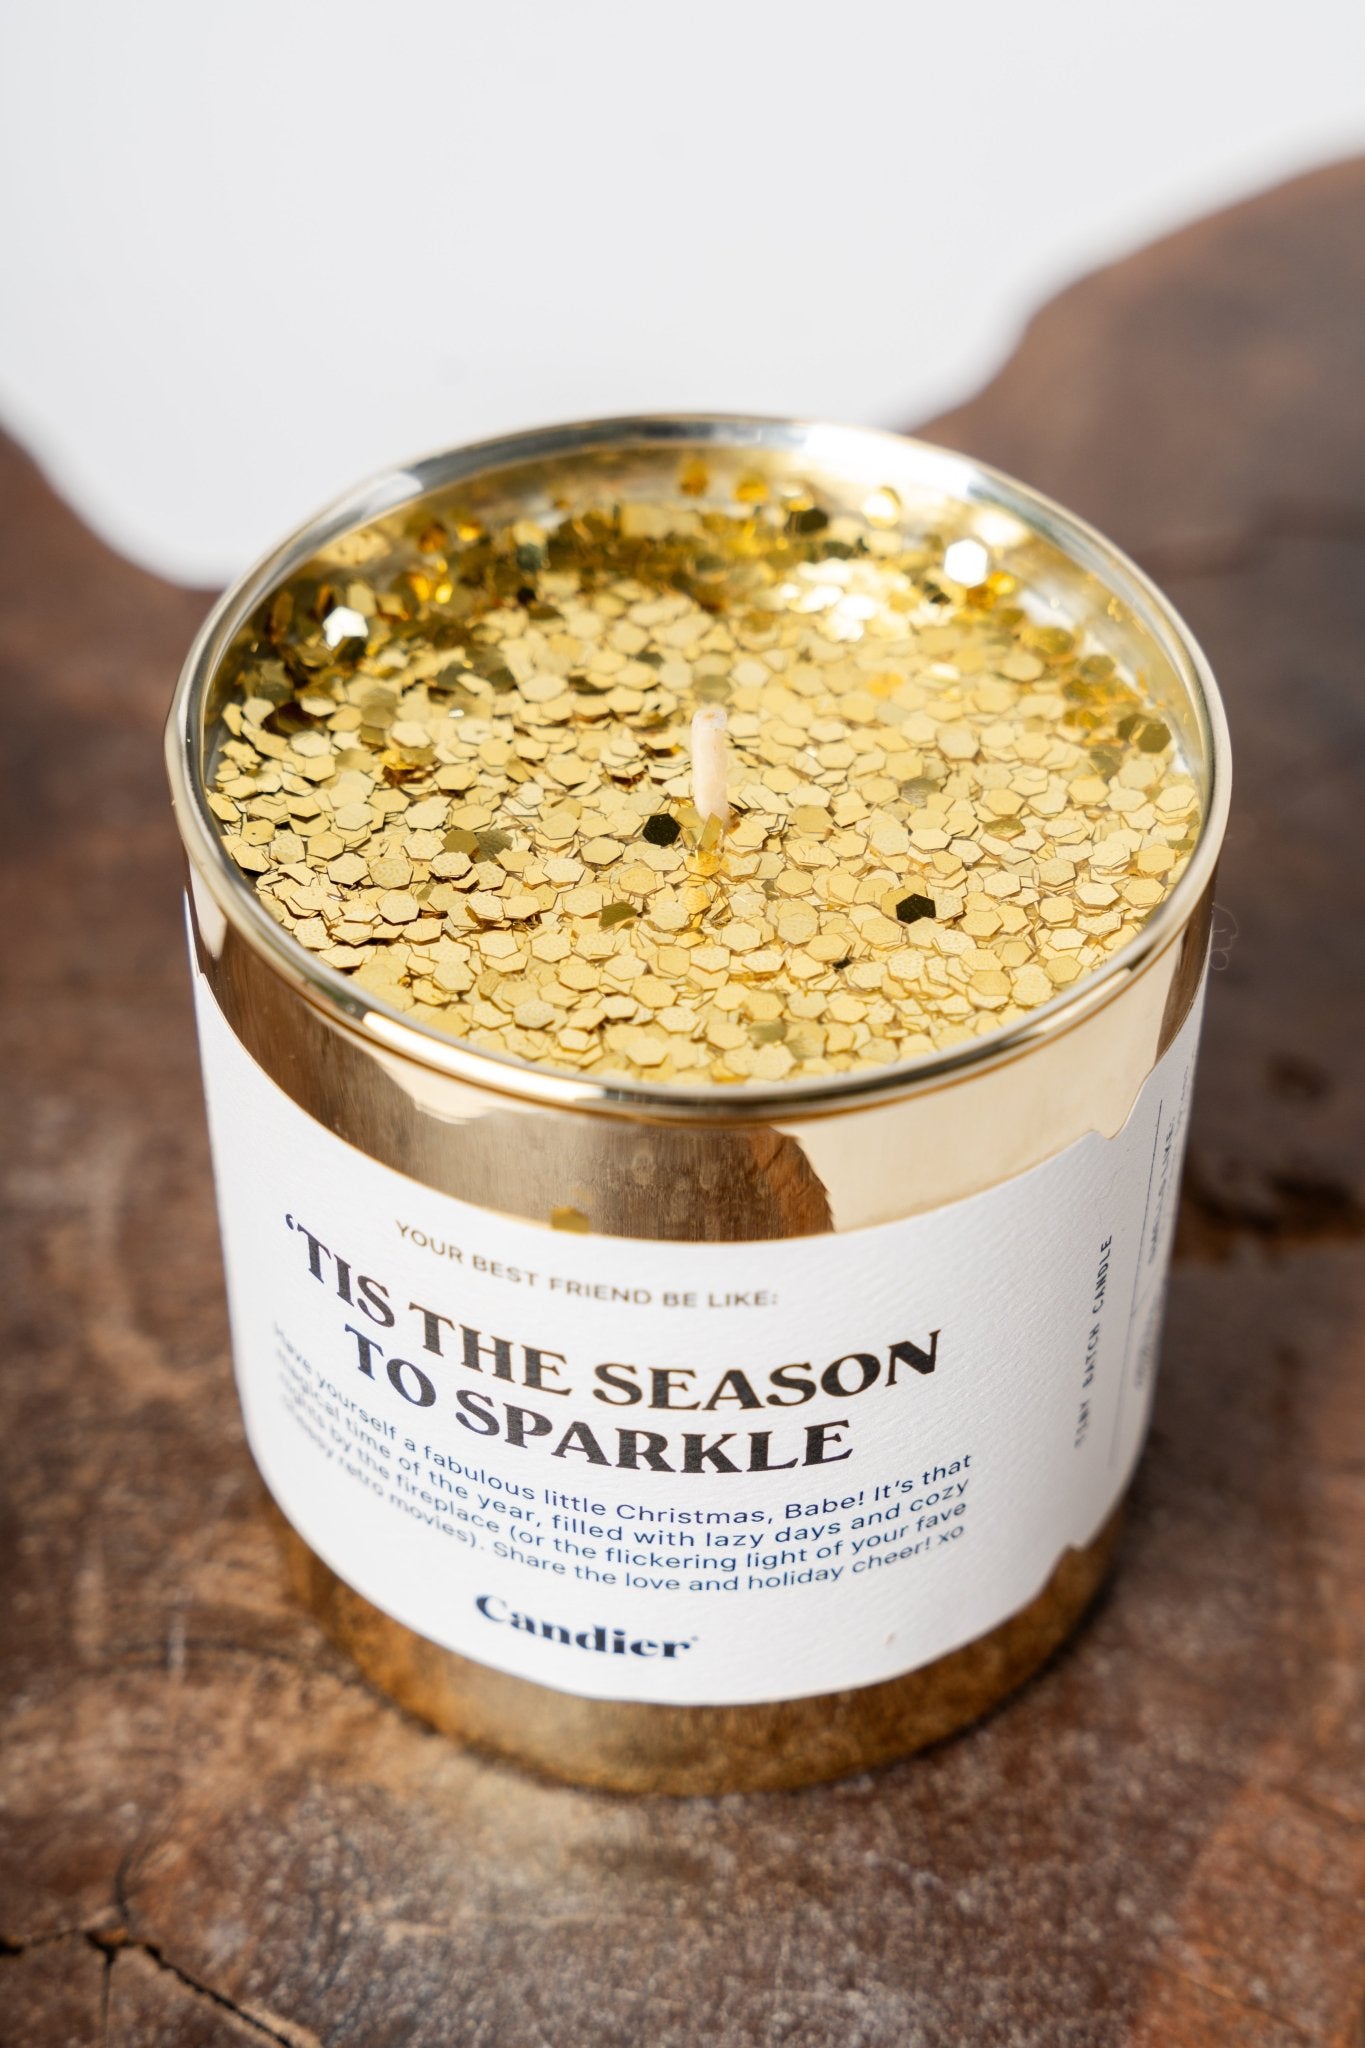 'Tis the season to sparkle Candier 9 oz candle - Exclusive Collection of Holiday Inspired T-Shirts and Hoodies at Lush Fashion Lounge Boutique in Oklahoma City